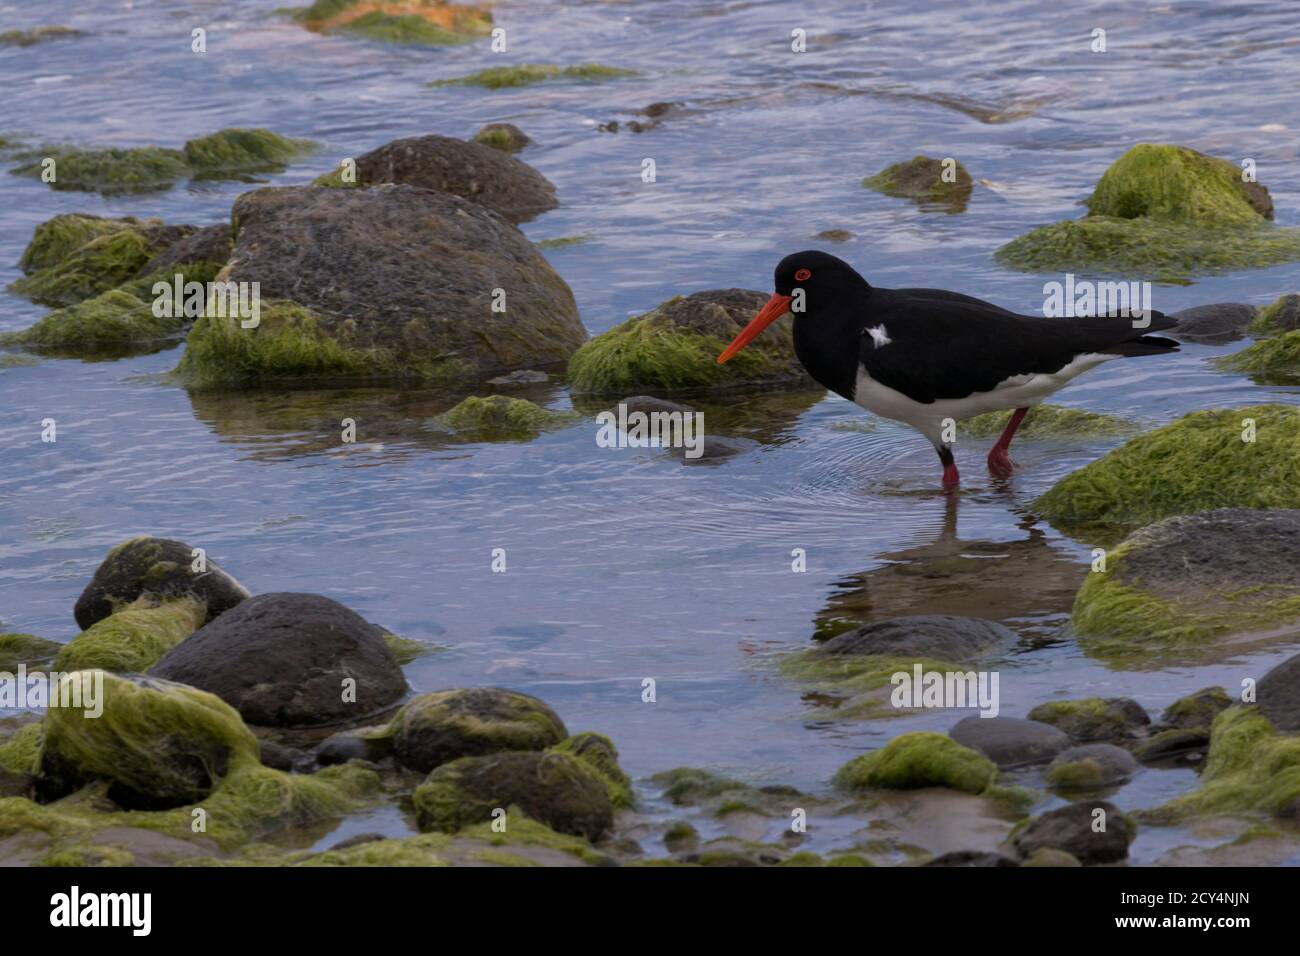 Black and white plumage and vivid red beak of pied oystercatcher is a striking hunter in coastal waters and rocks of Bruny Island in Tasmania Stock Photo